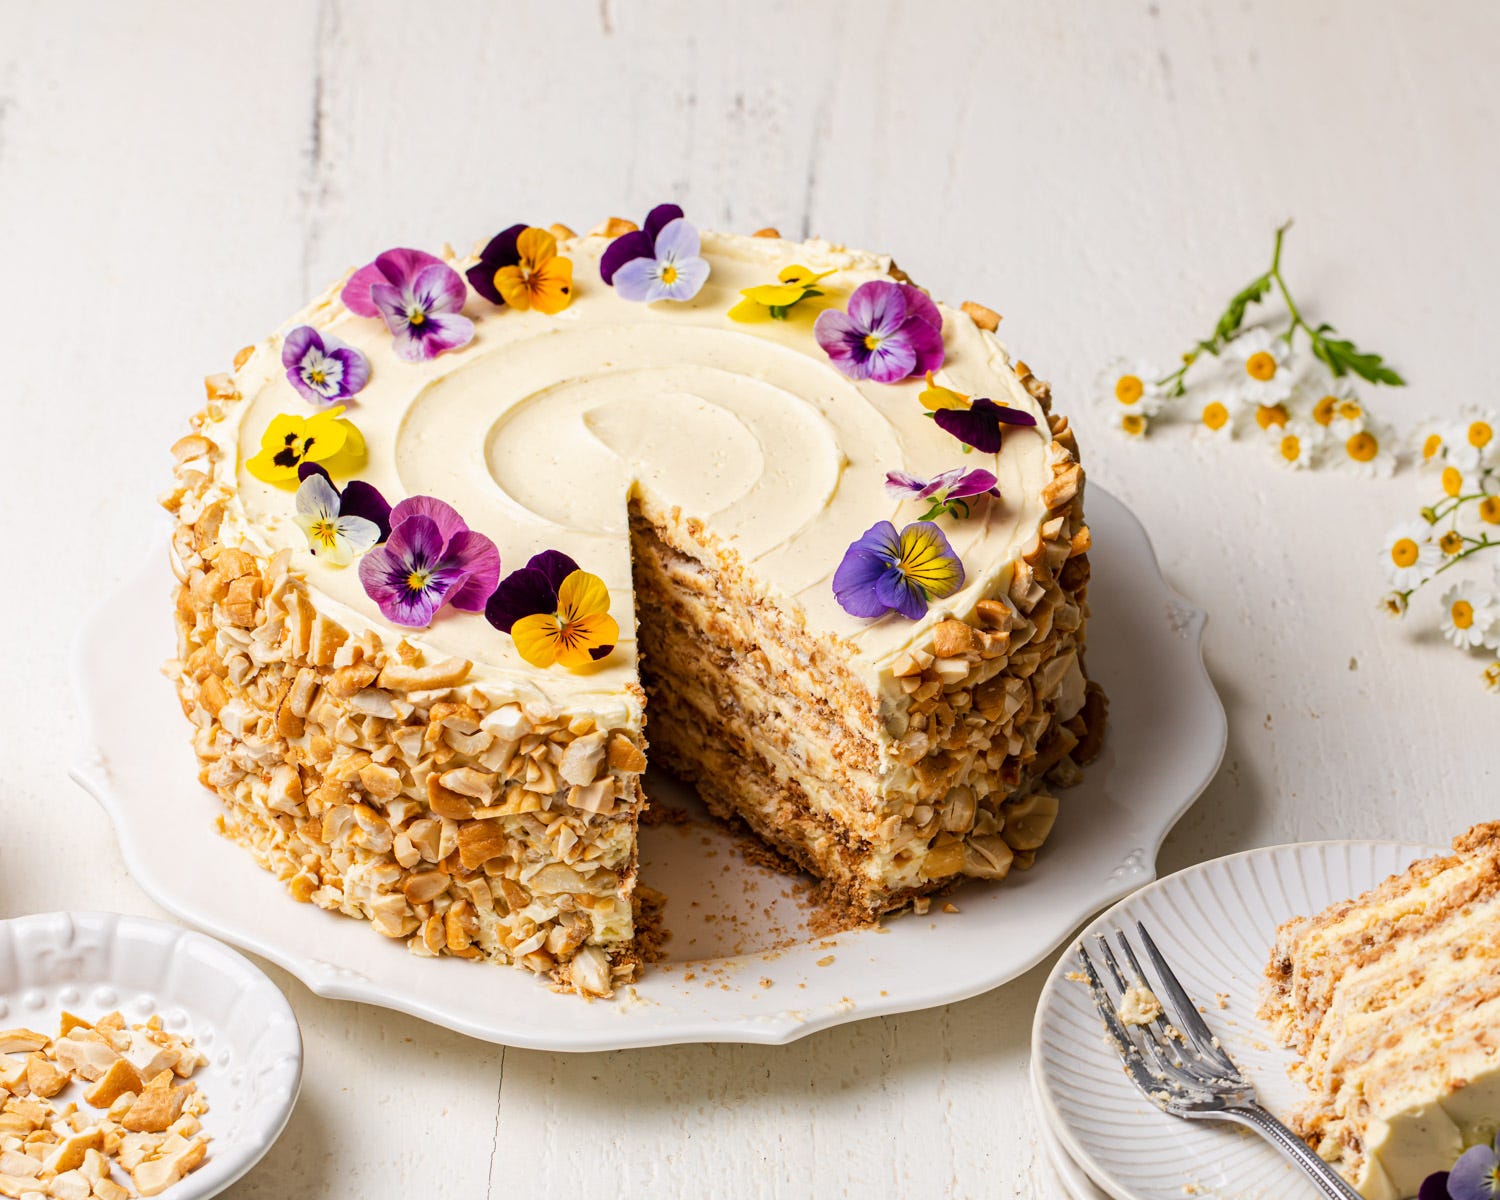 10 Festive New Year's Cake Ideas - Find Your Cake Inspiration